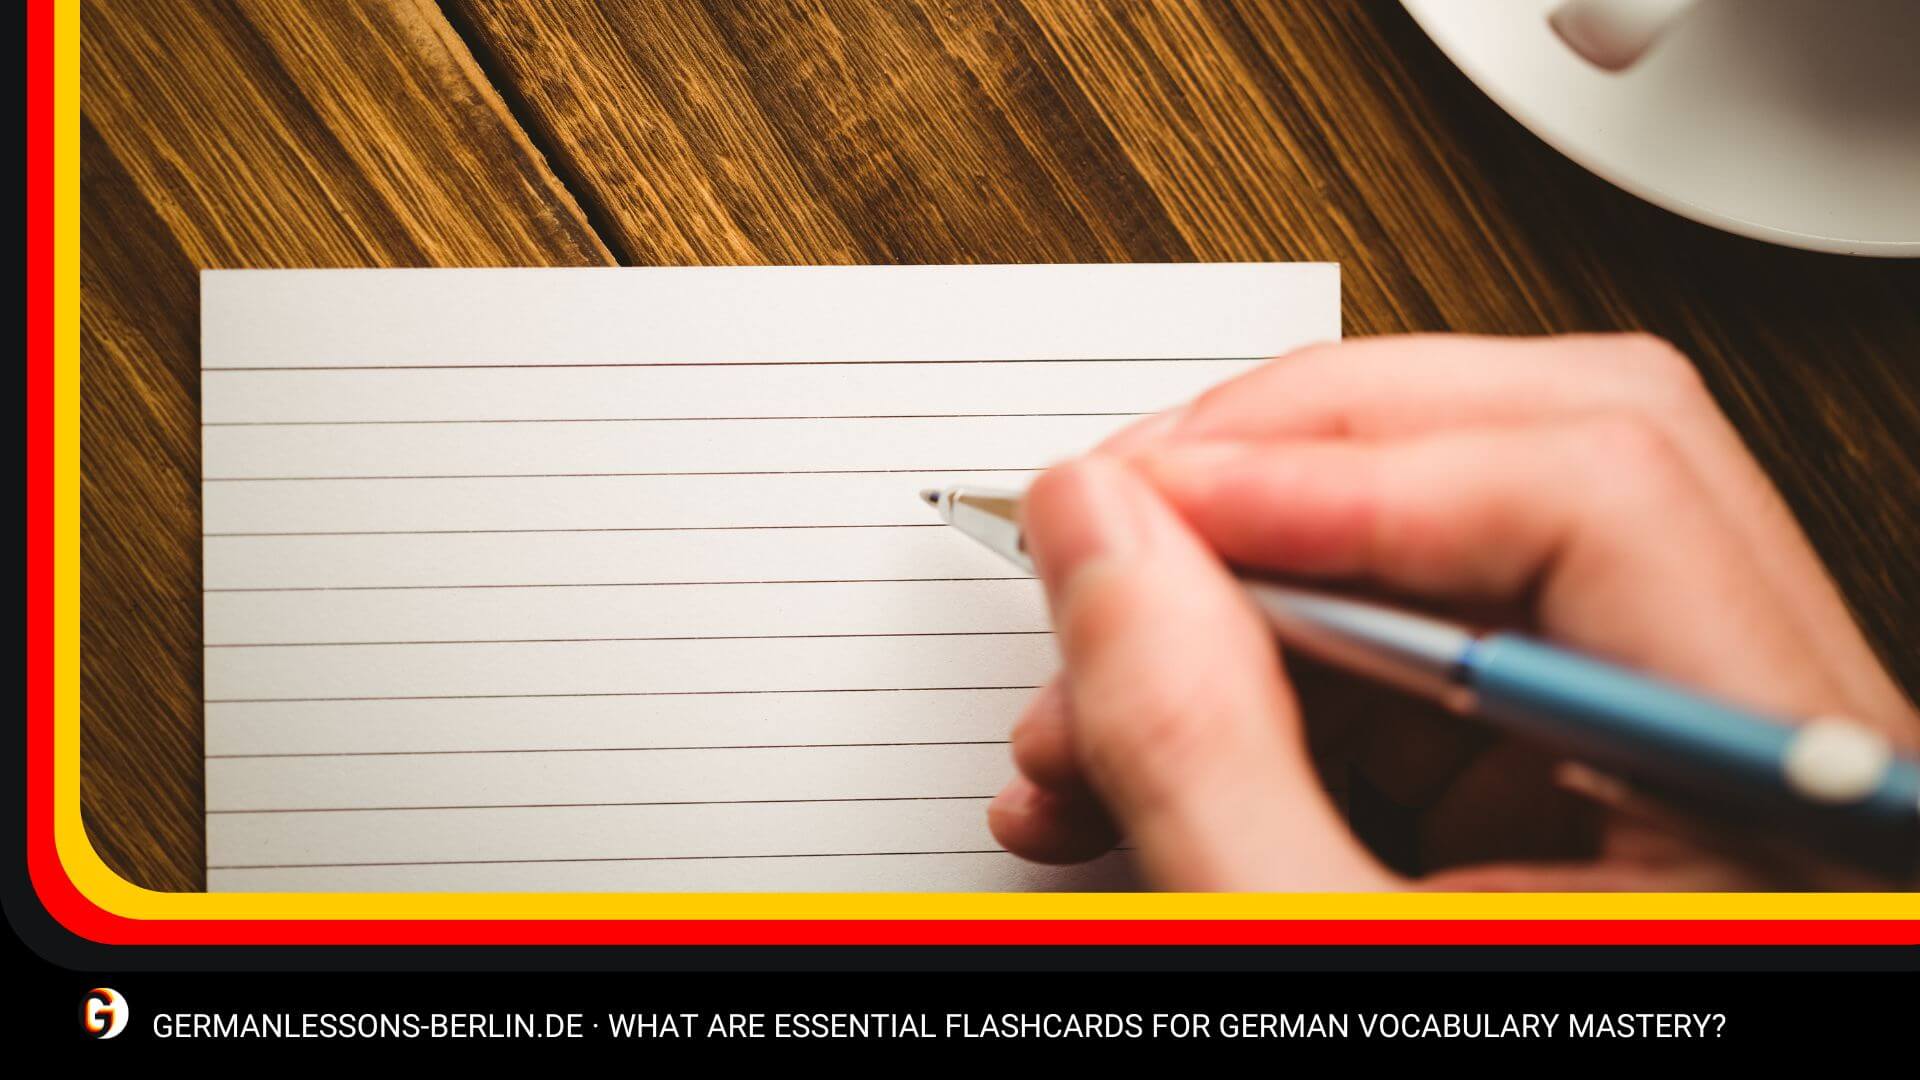 What Are Essential Flashcards for German Vocabulary Mastery?